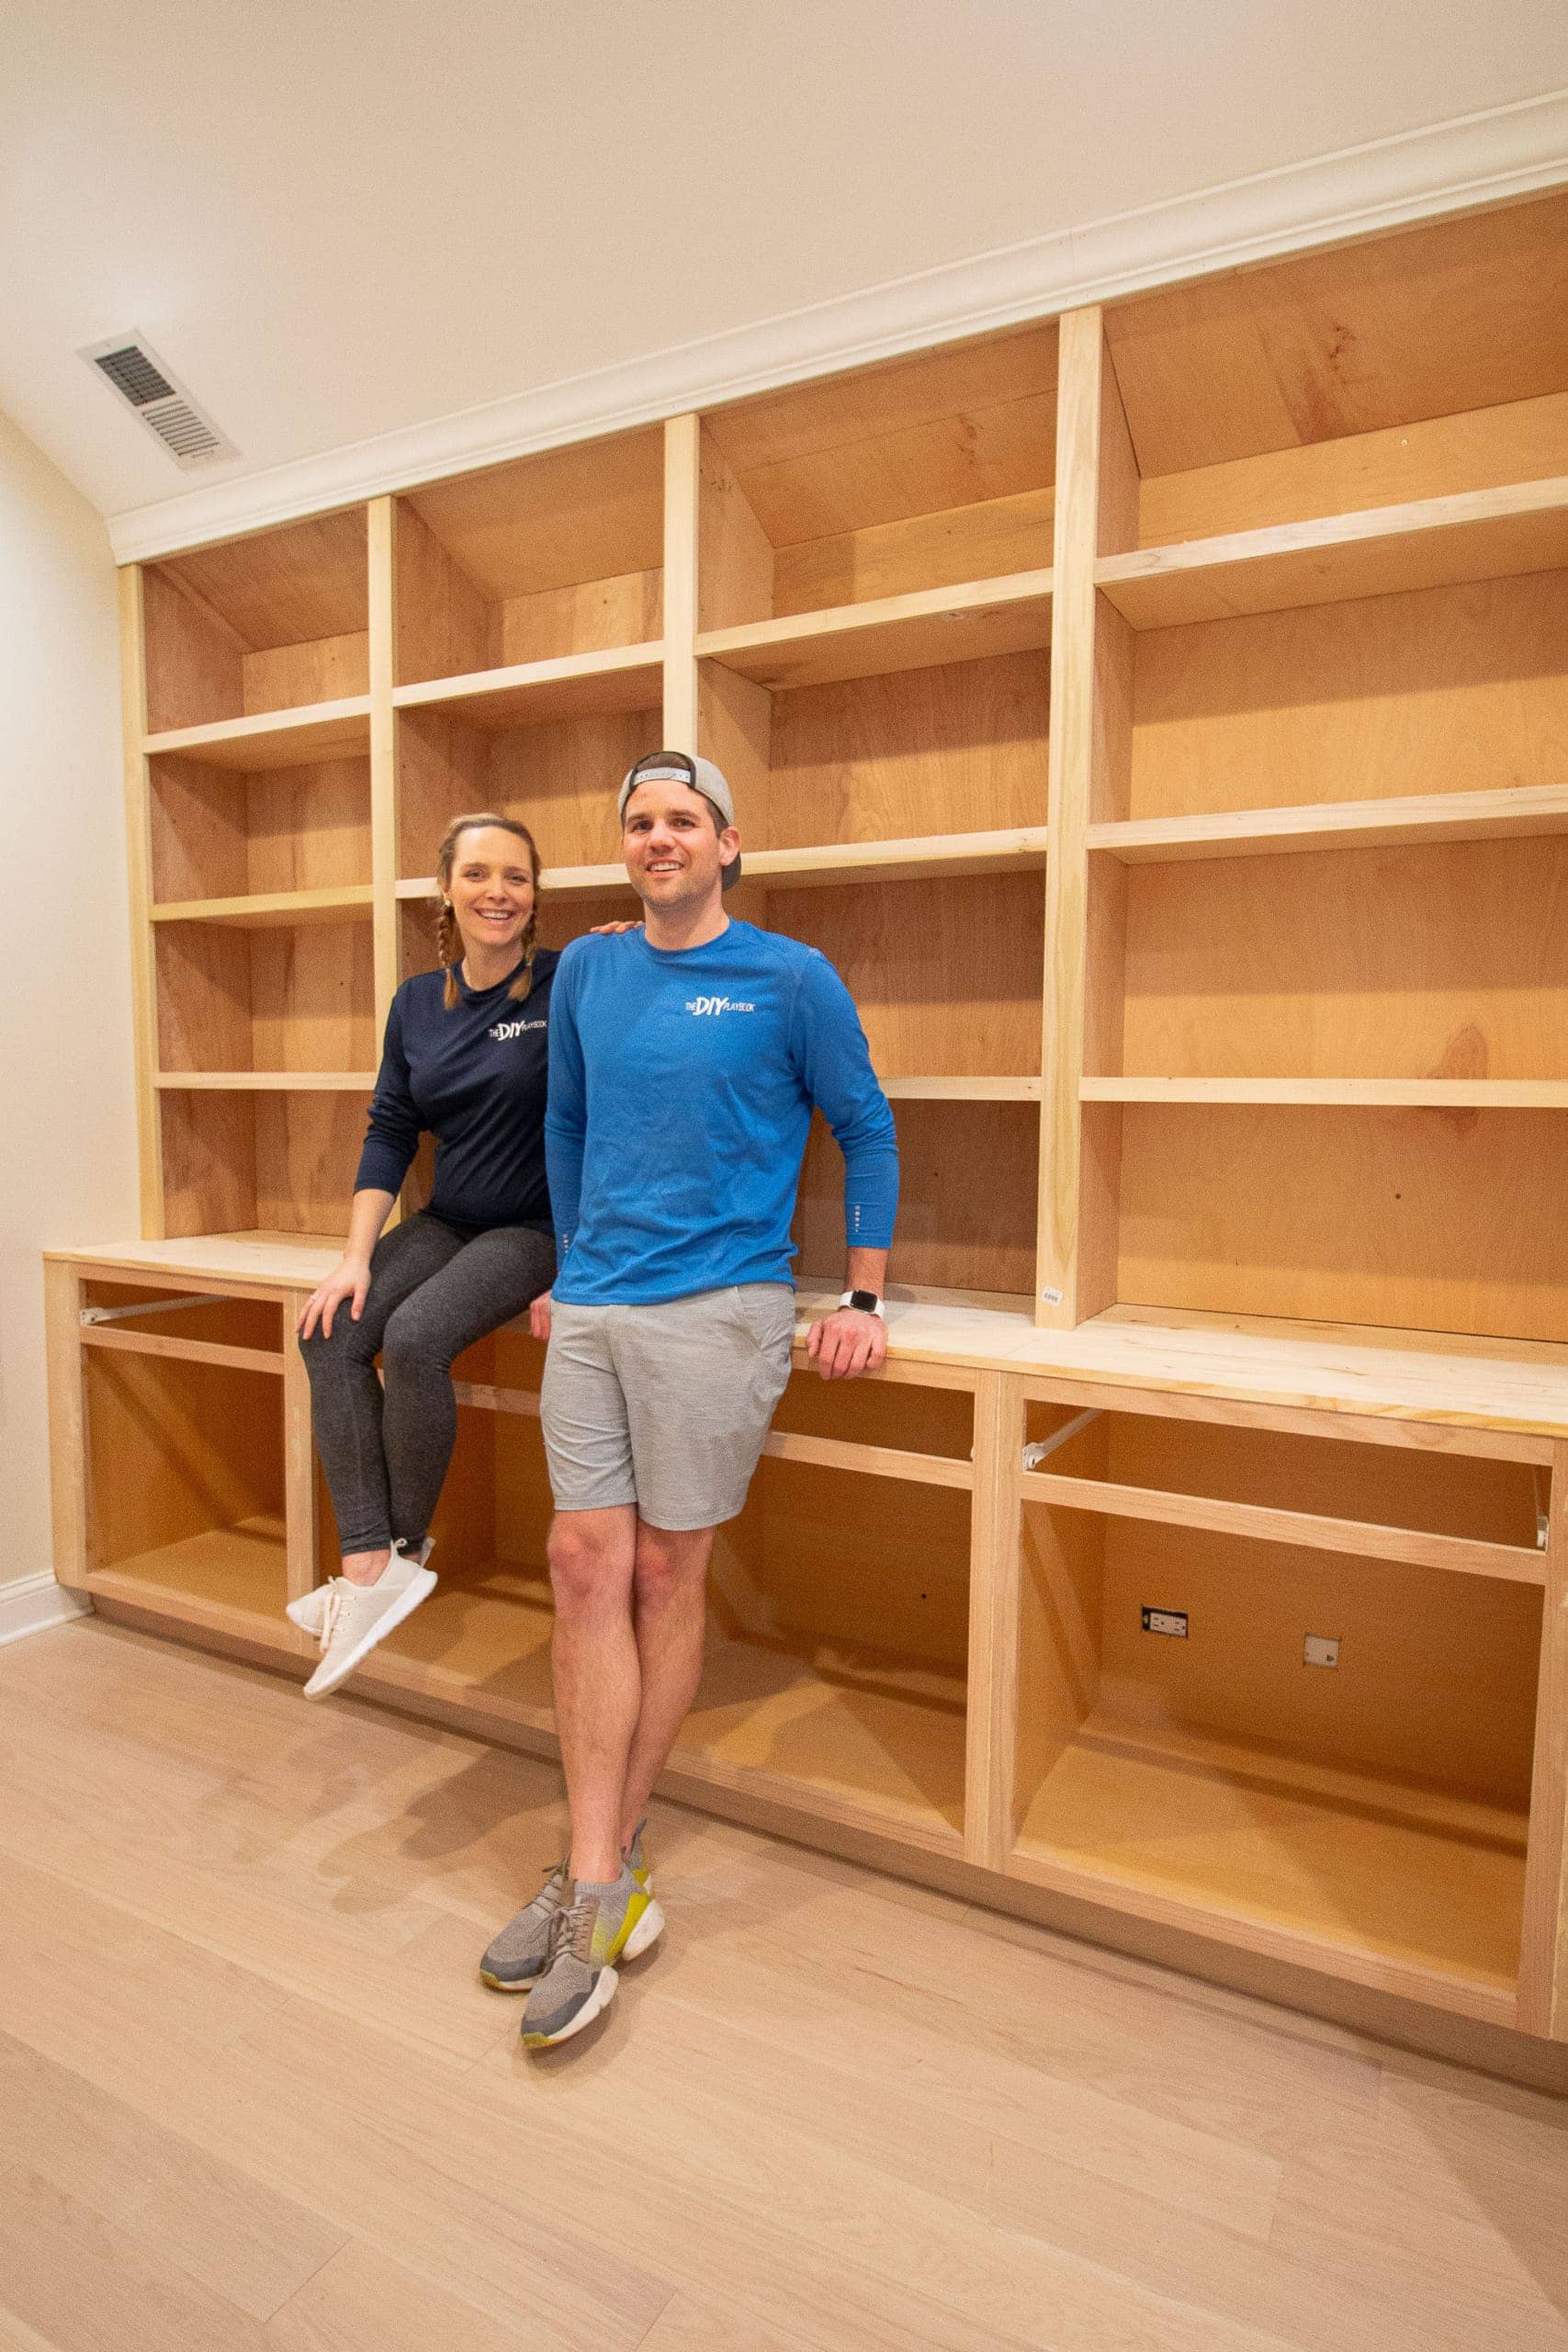 how to build diy bookshelves for built-ins | the diy playbook